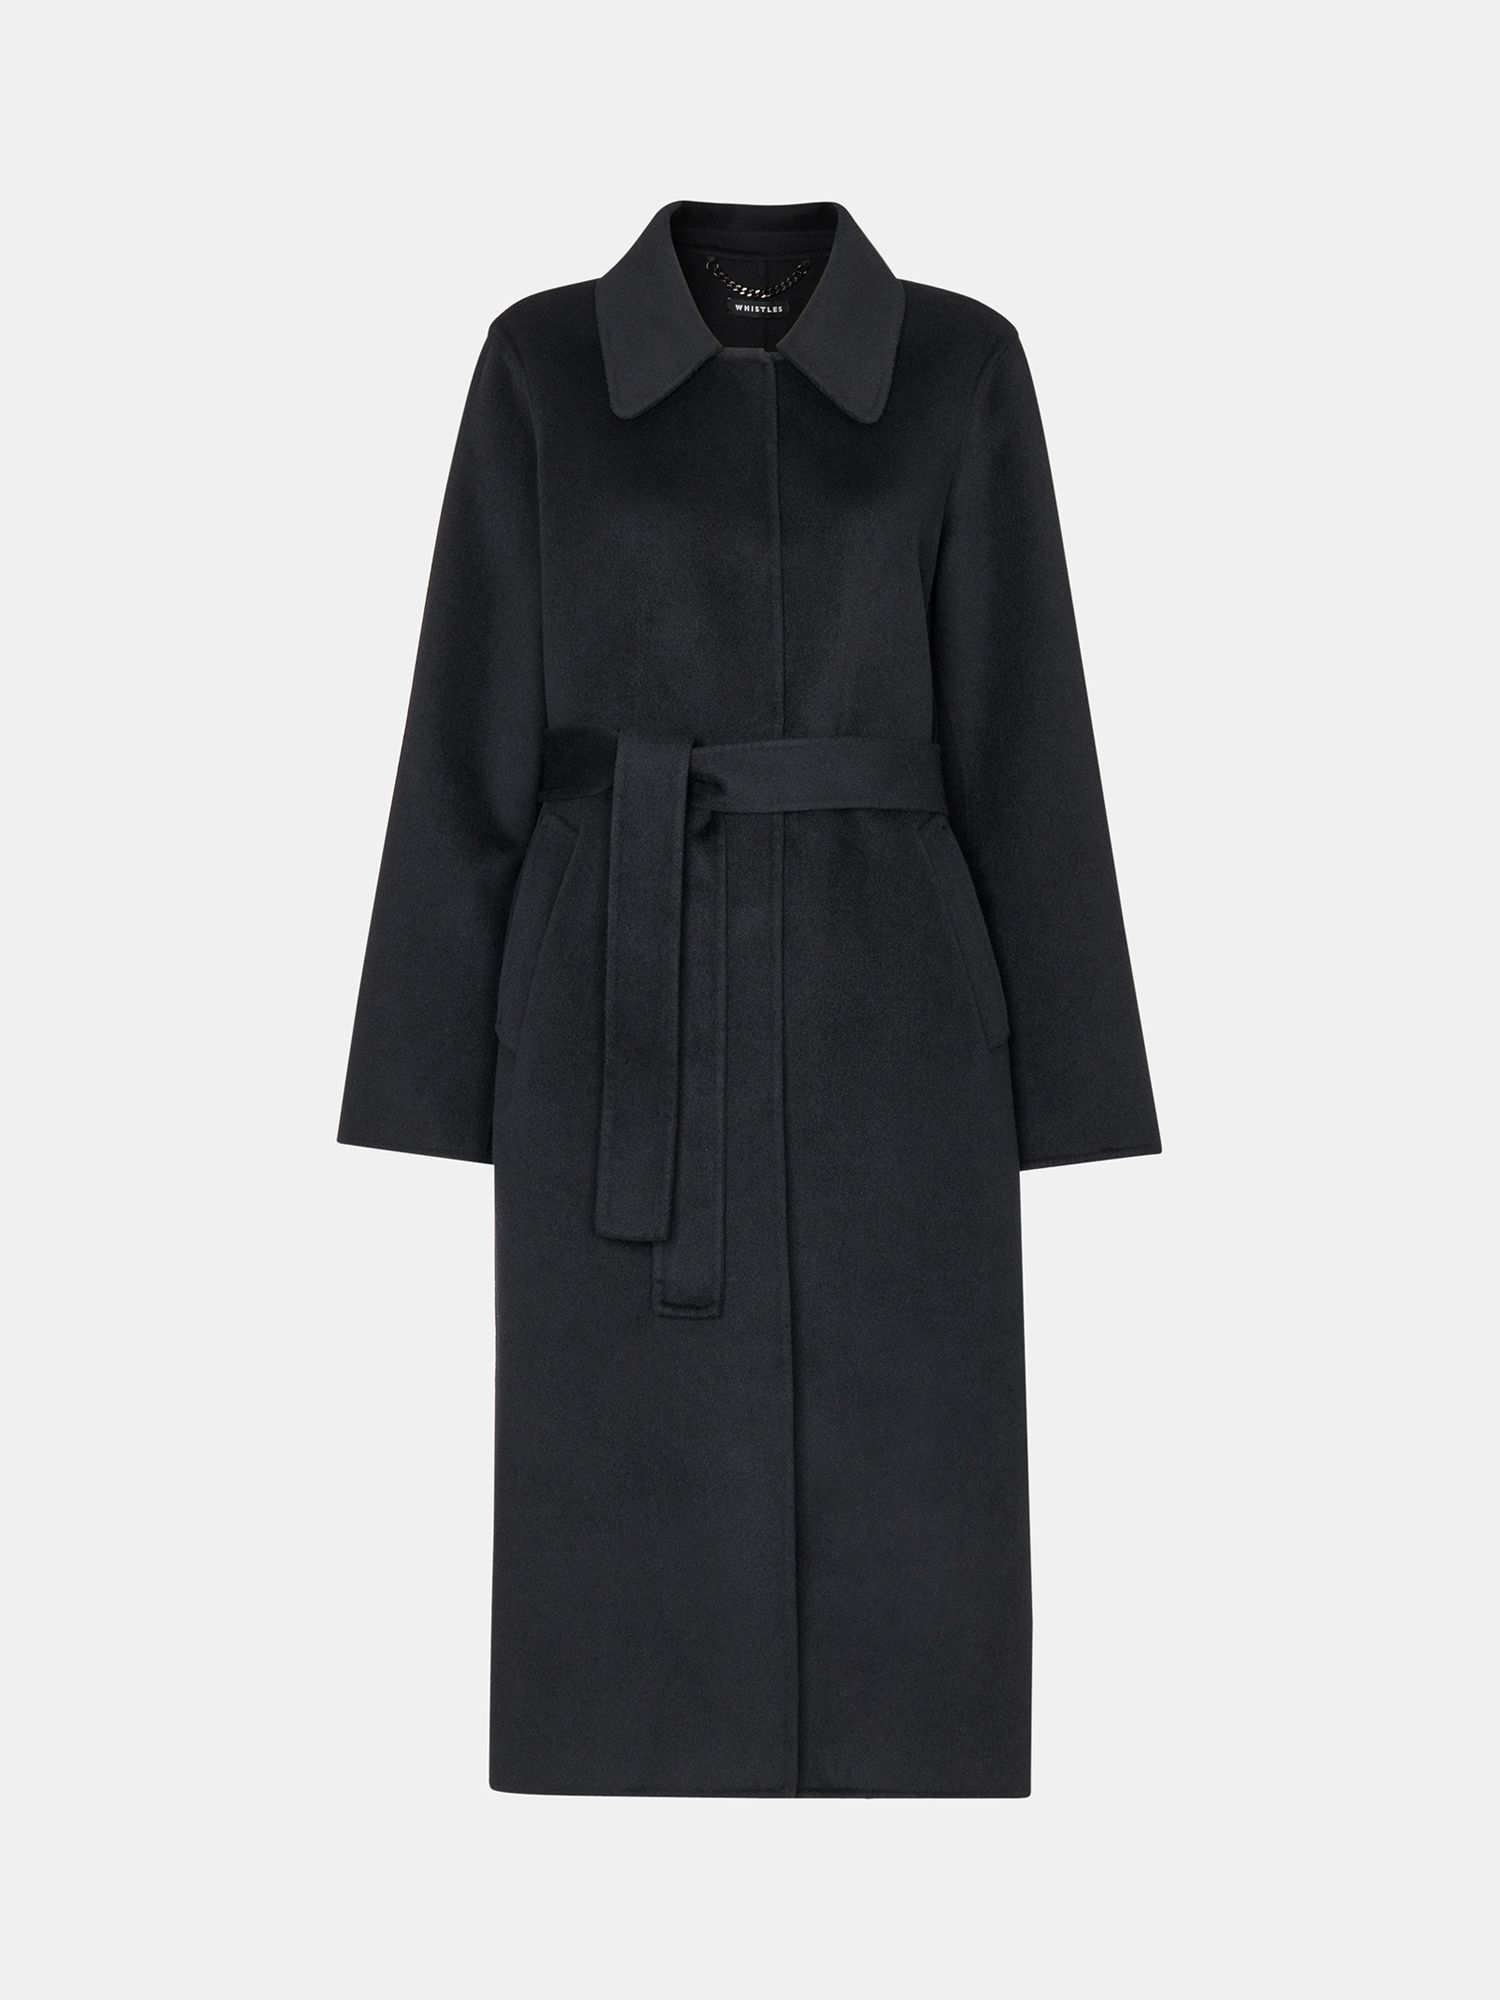 Whistles Nell Belted Doubled Faced Coat, Black at John Lewis & Partners